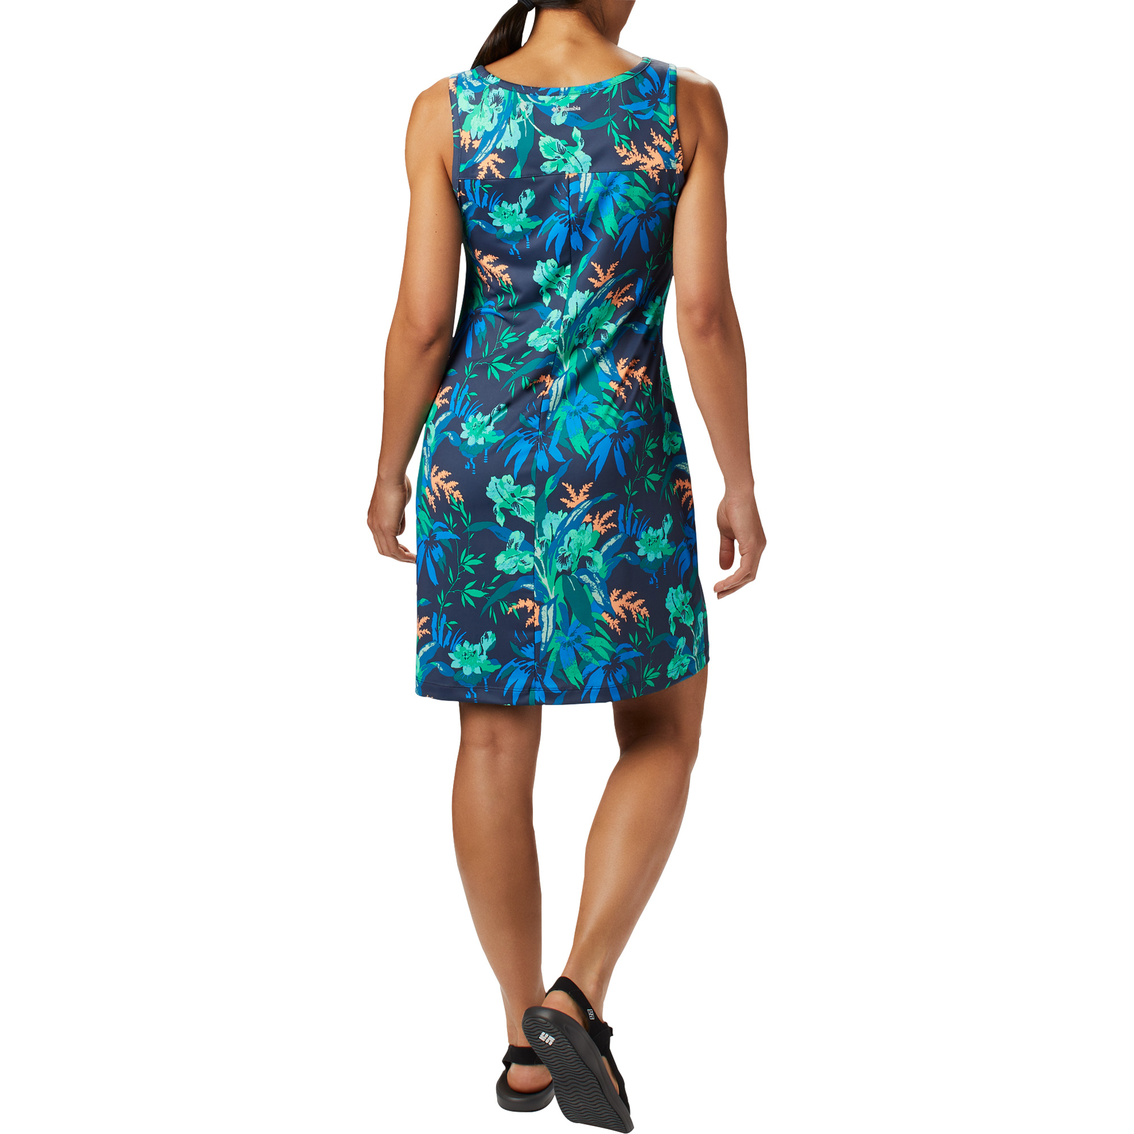 Columbia Chill River Printed Dress - Image 2 of 5